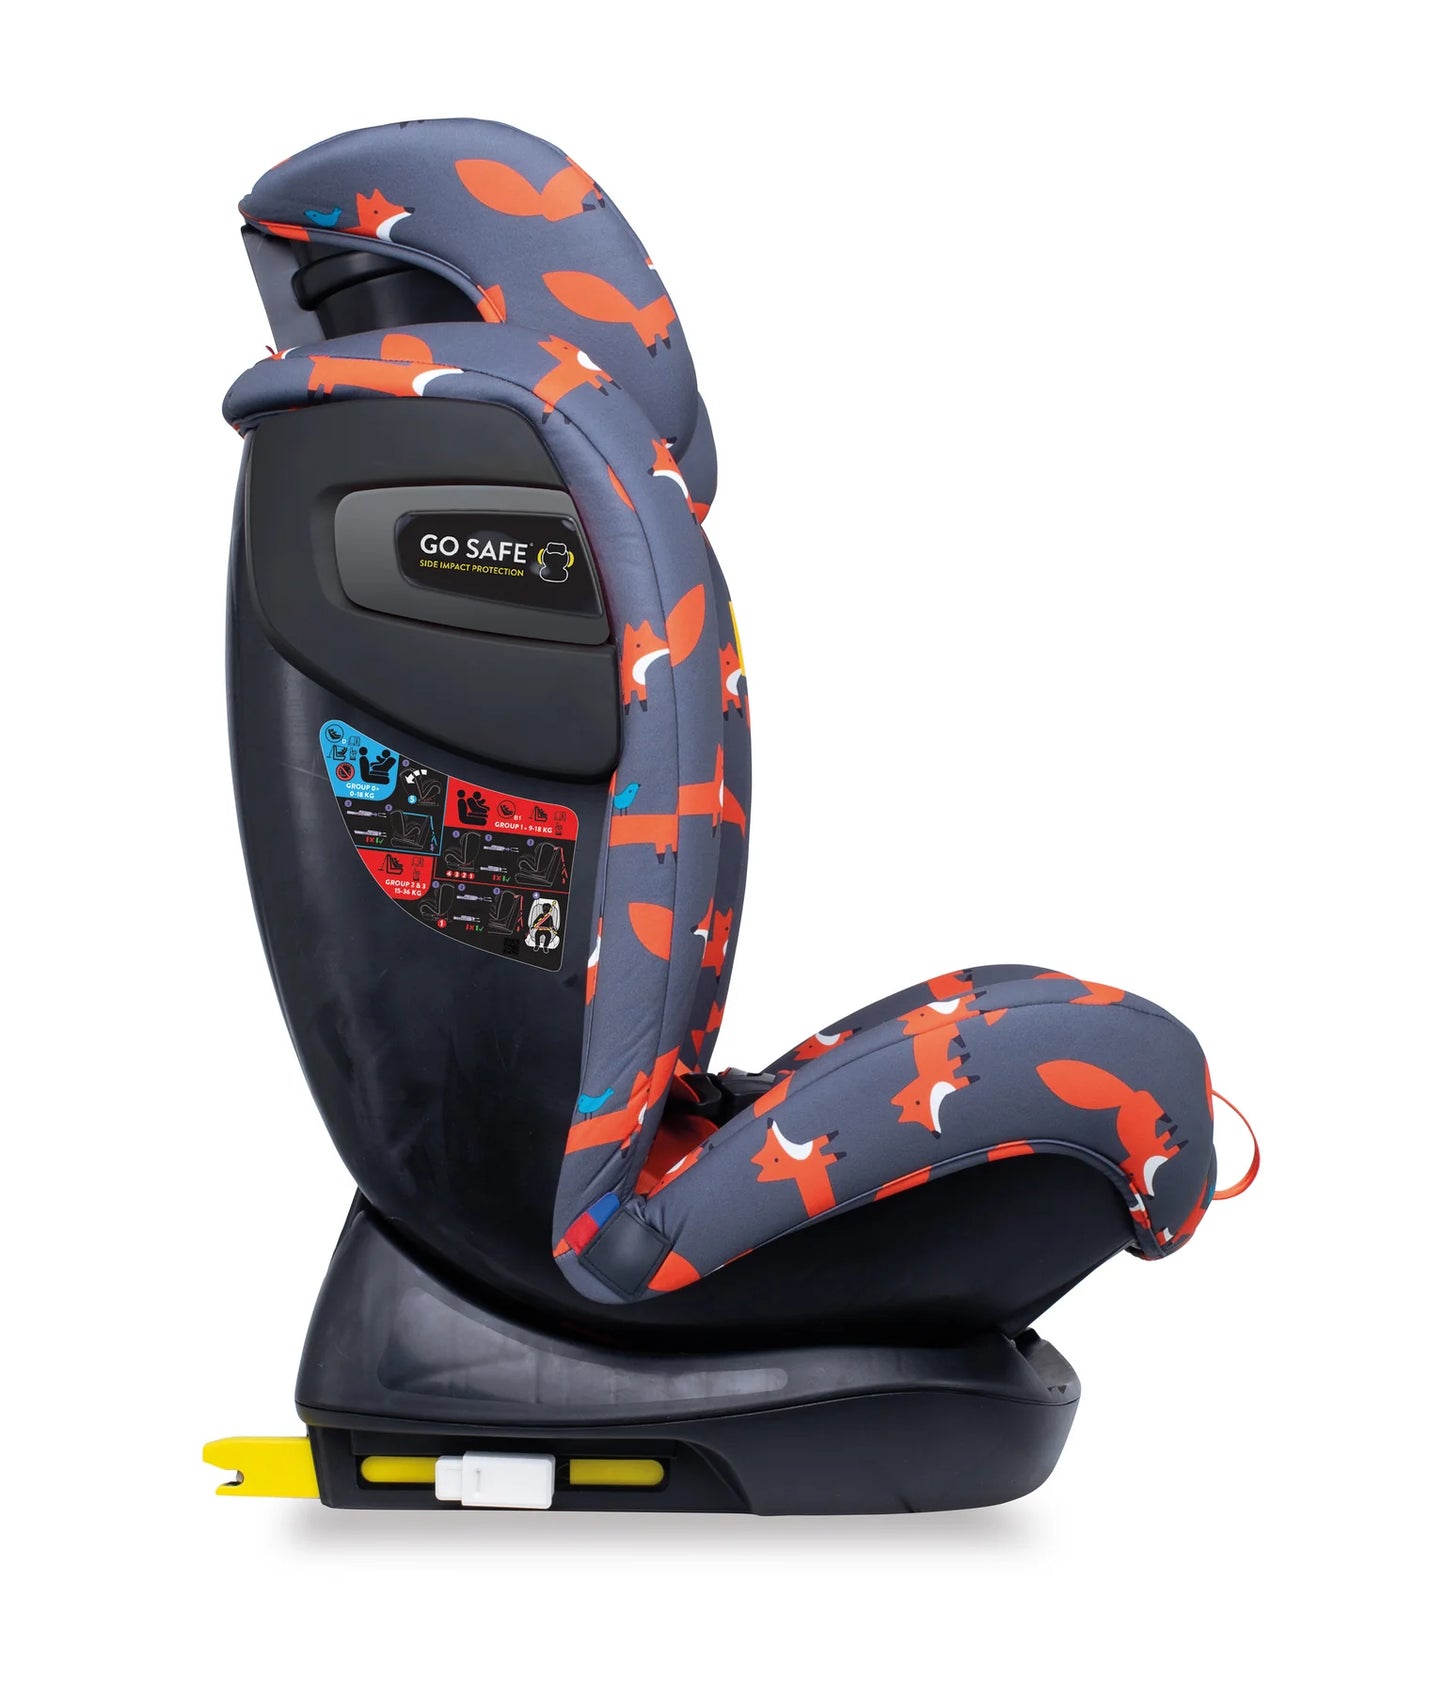 Cosatto All in All + Group 0+123 Car Seat Mister Fox